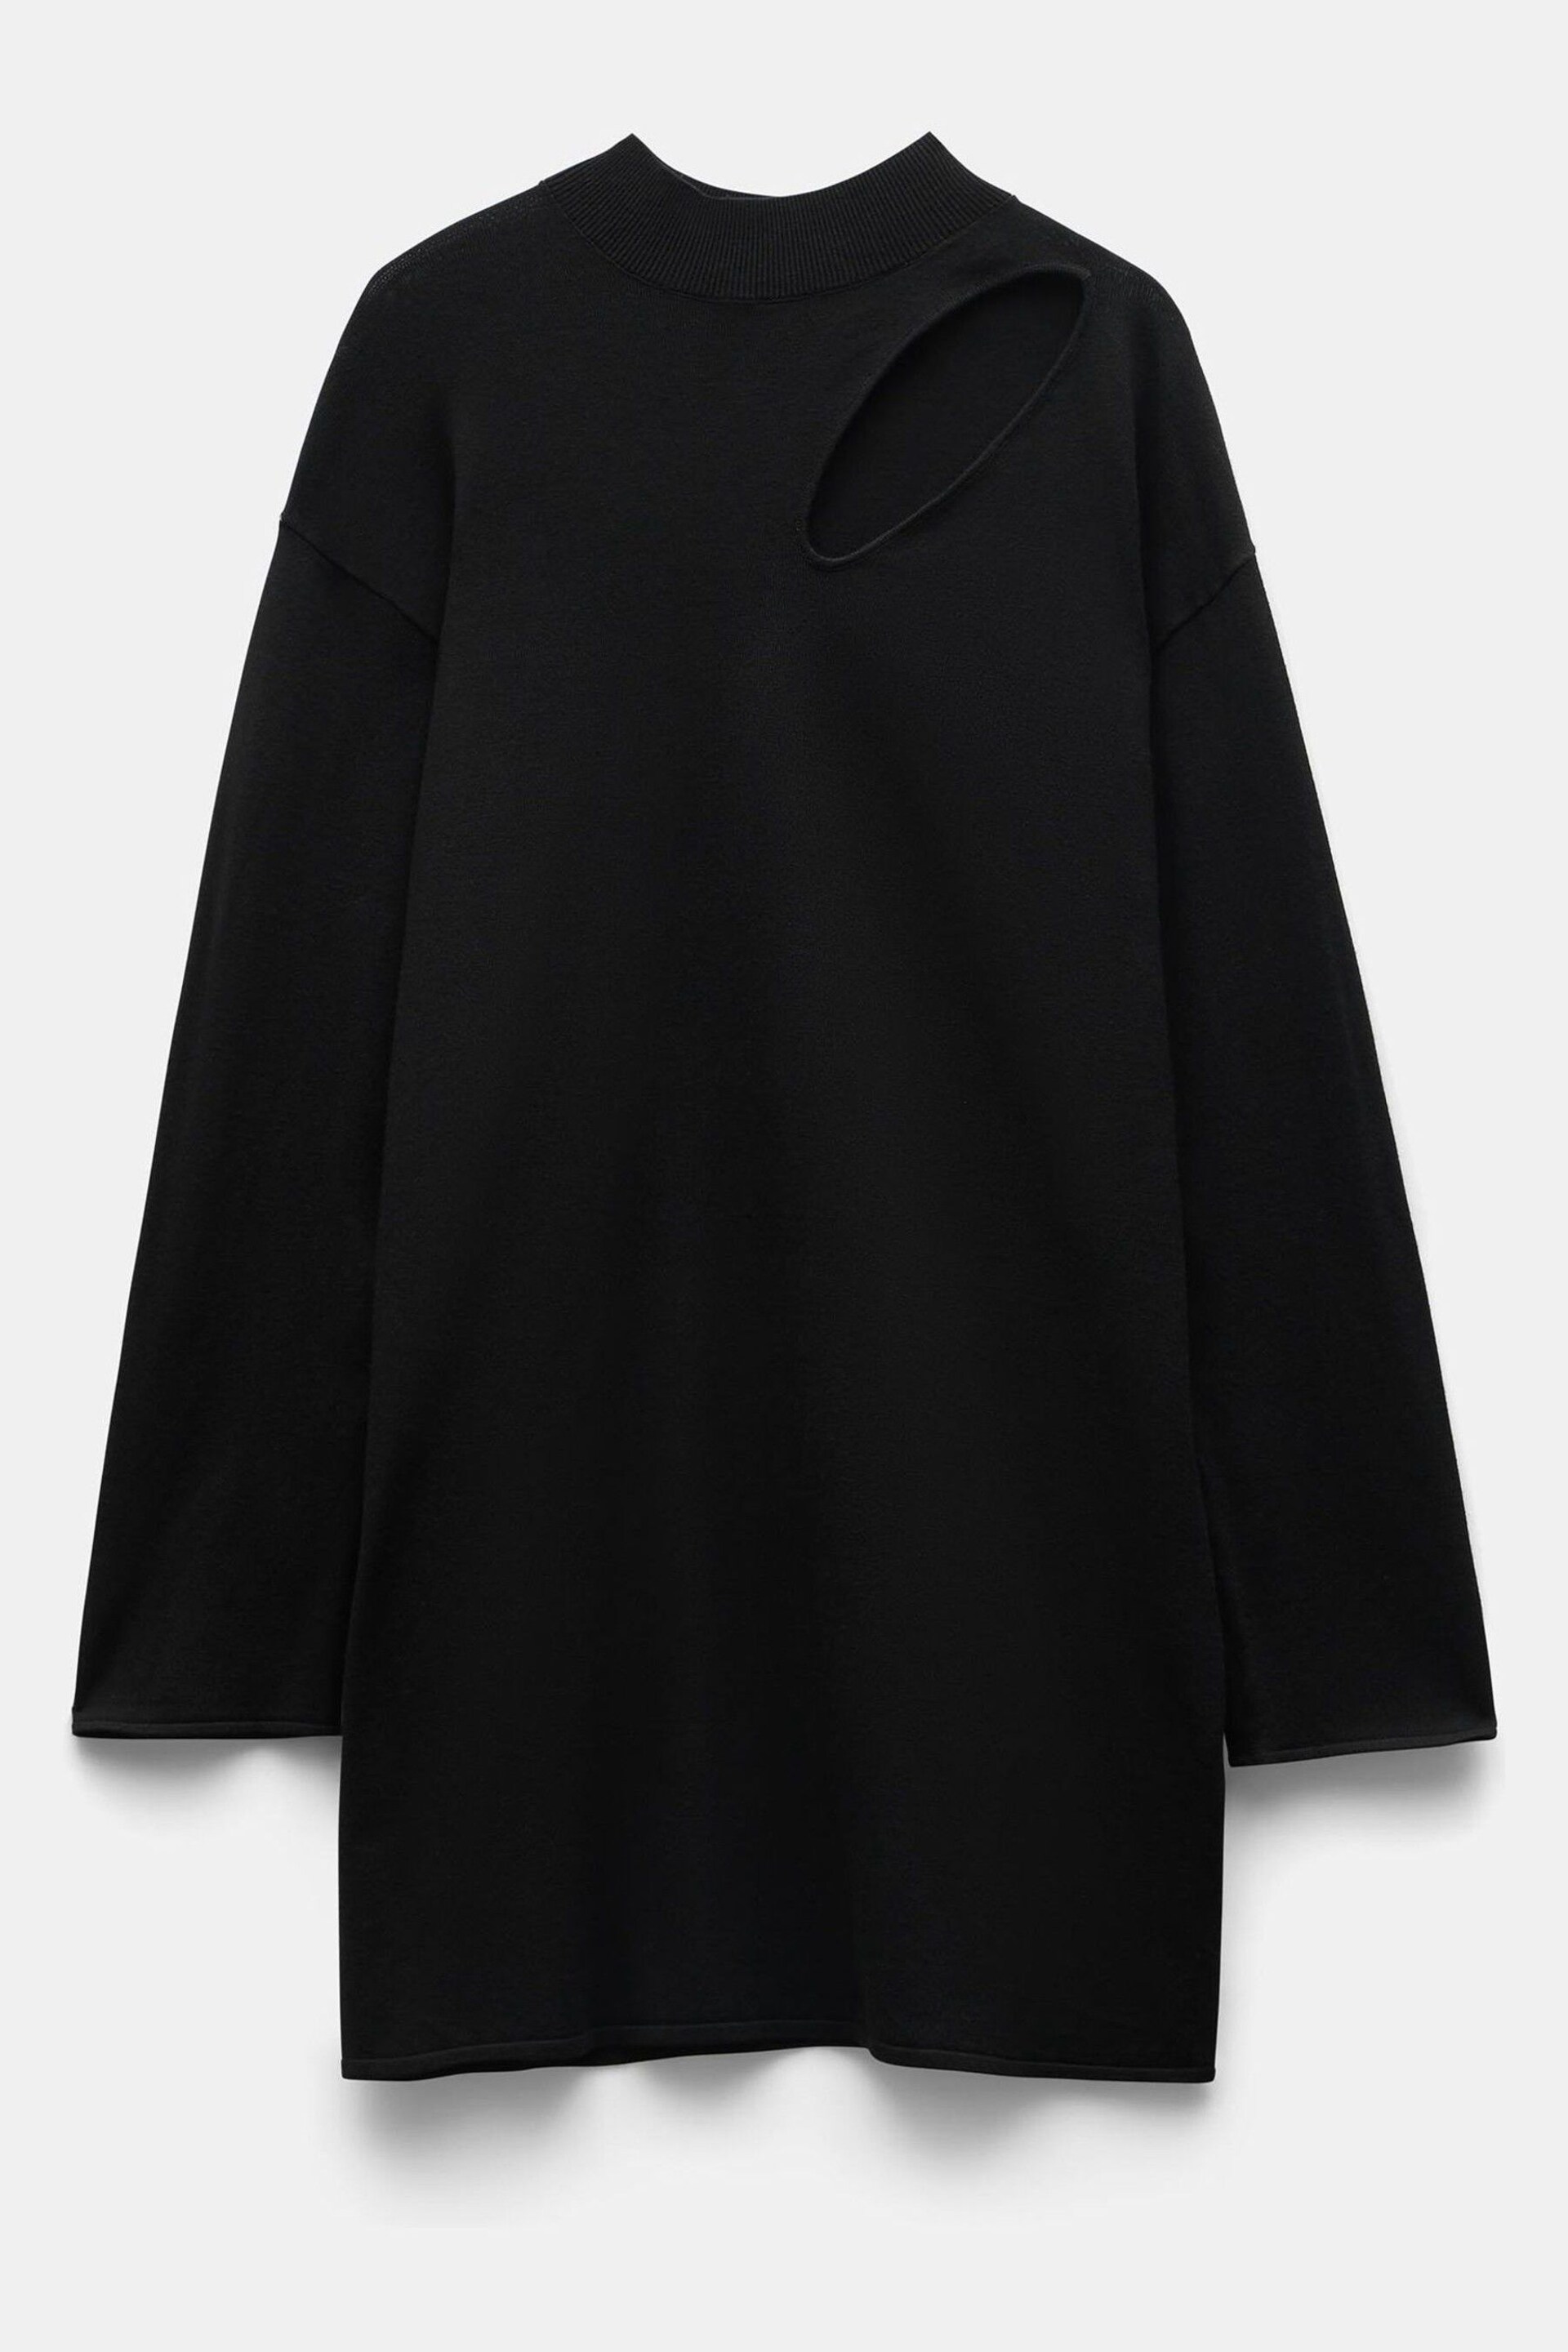 Hush Black Colby Cut Out Knitted Dress - Image 5 of 5